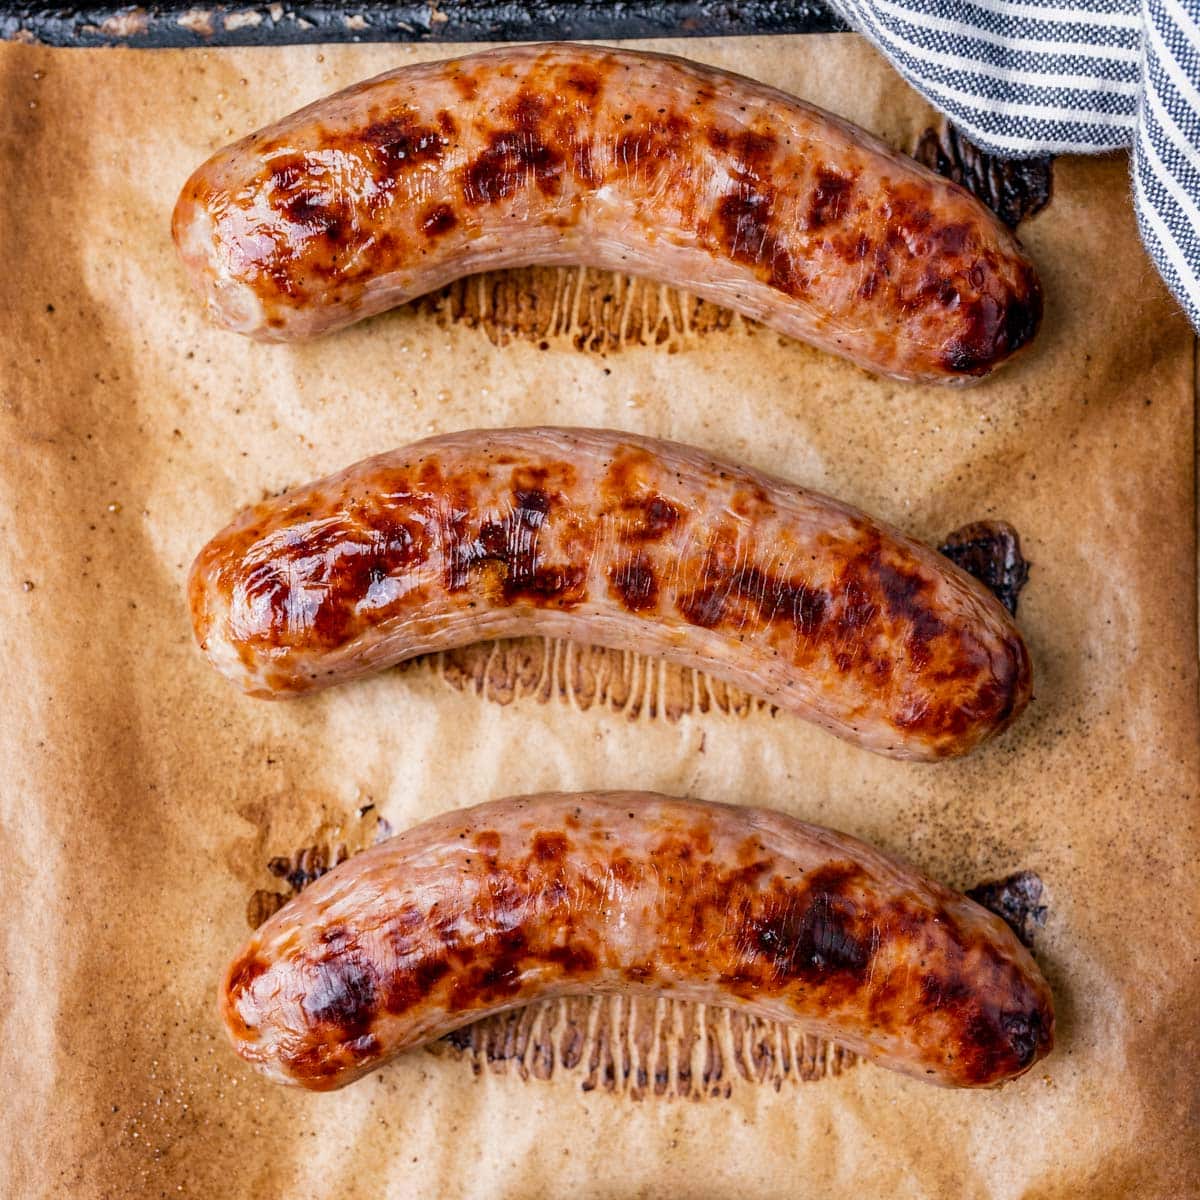 How To Cook Johnsonville Brats In The Oven 